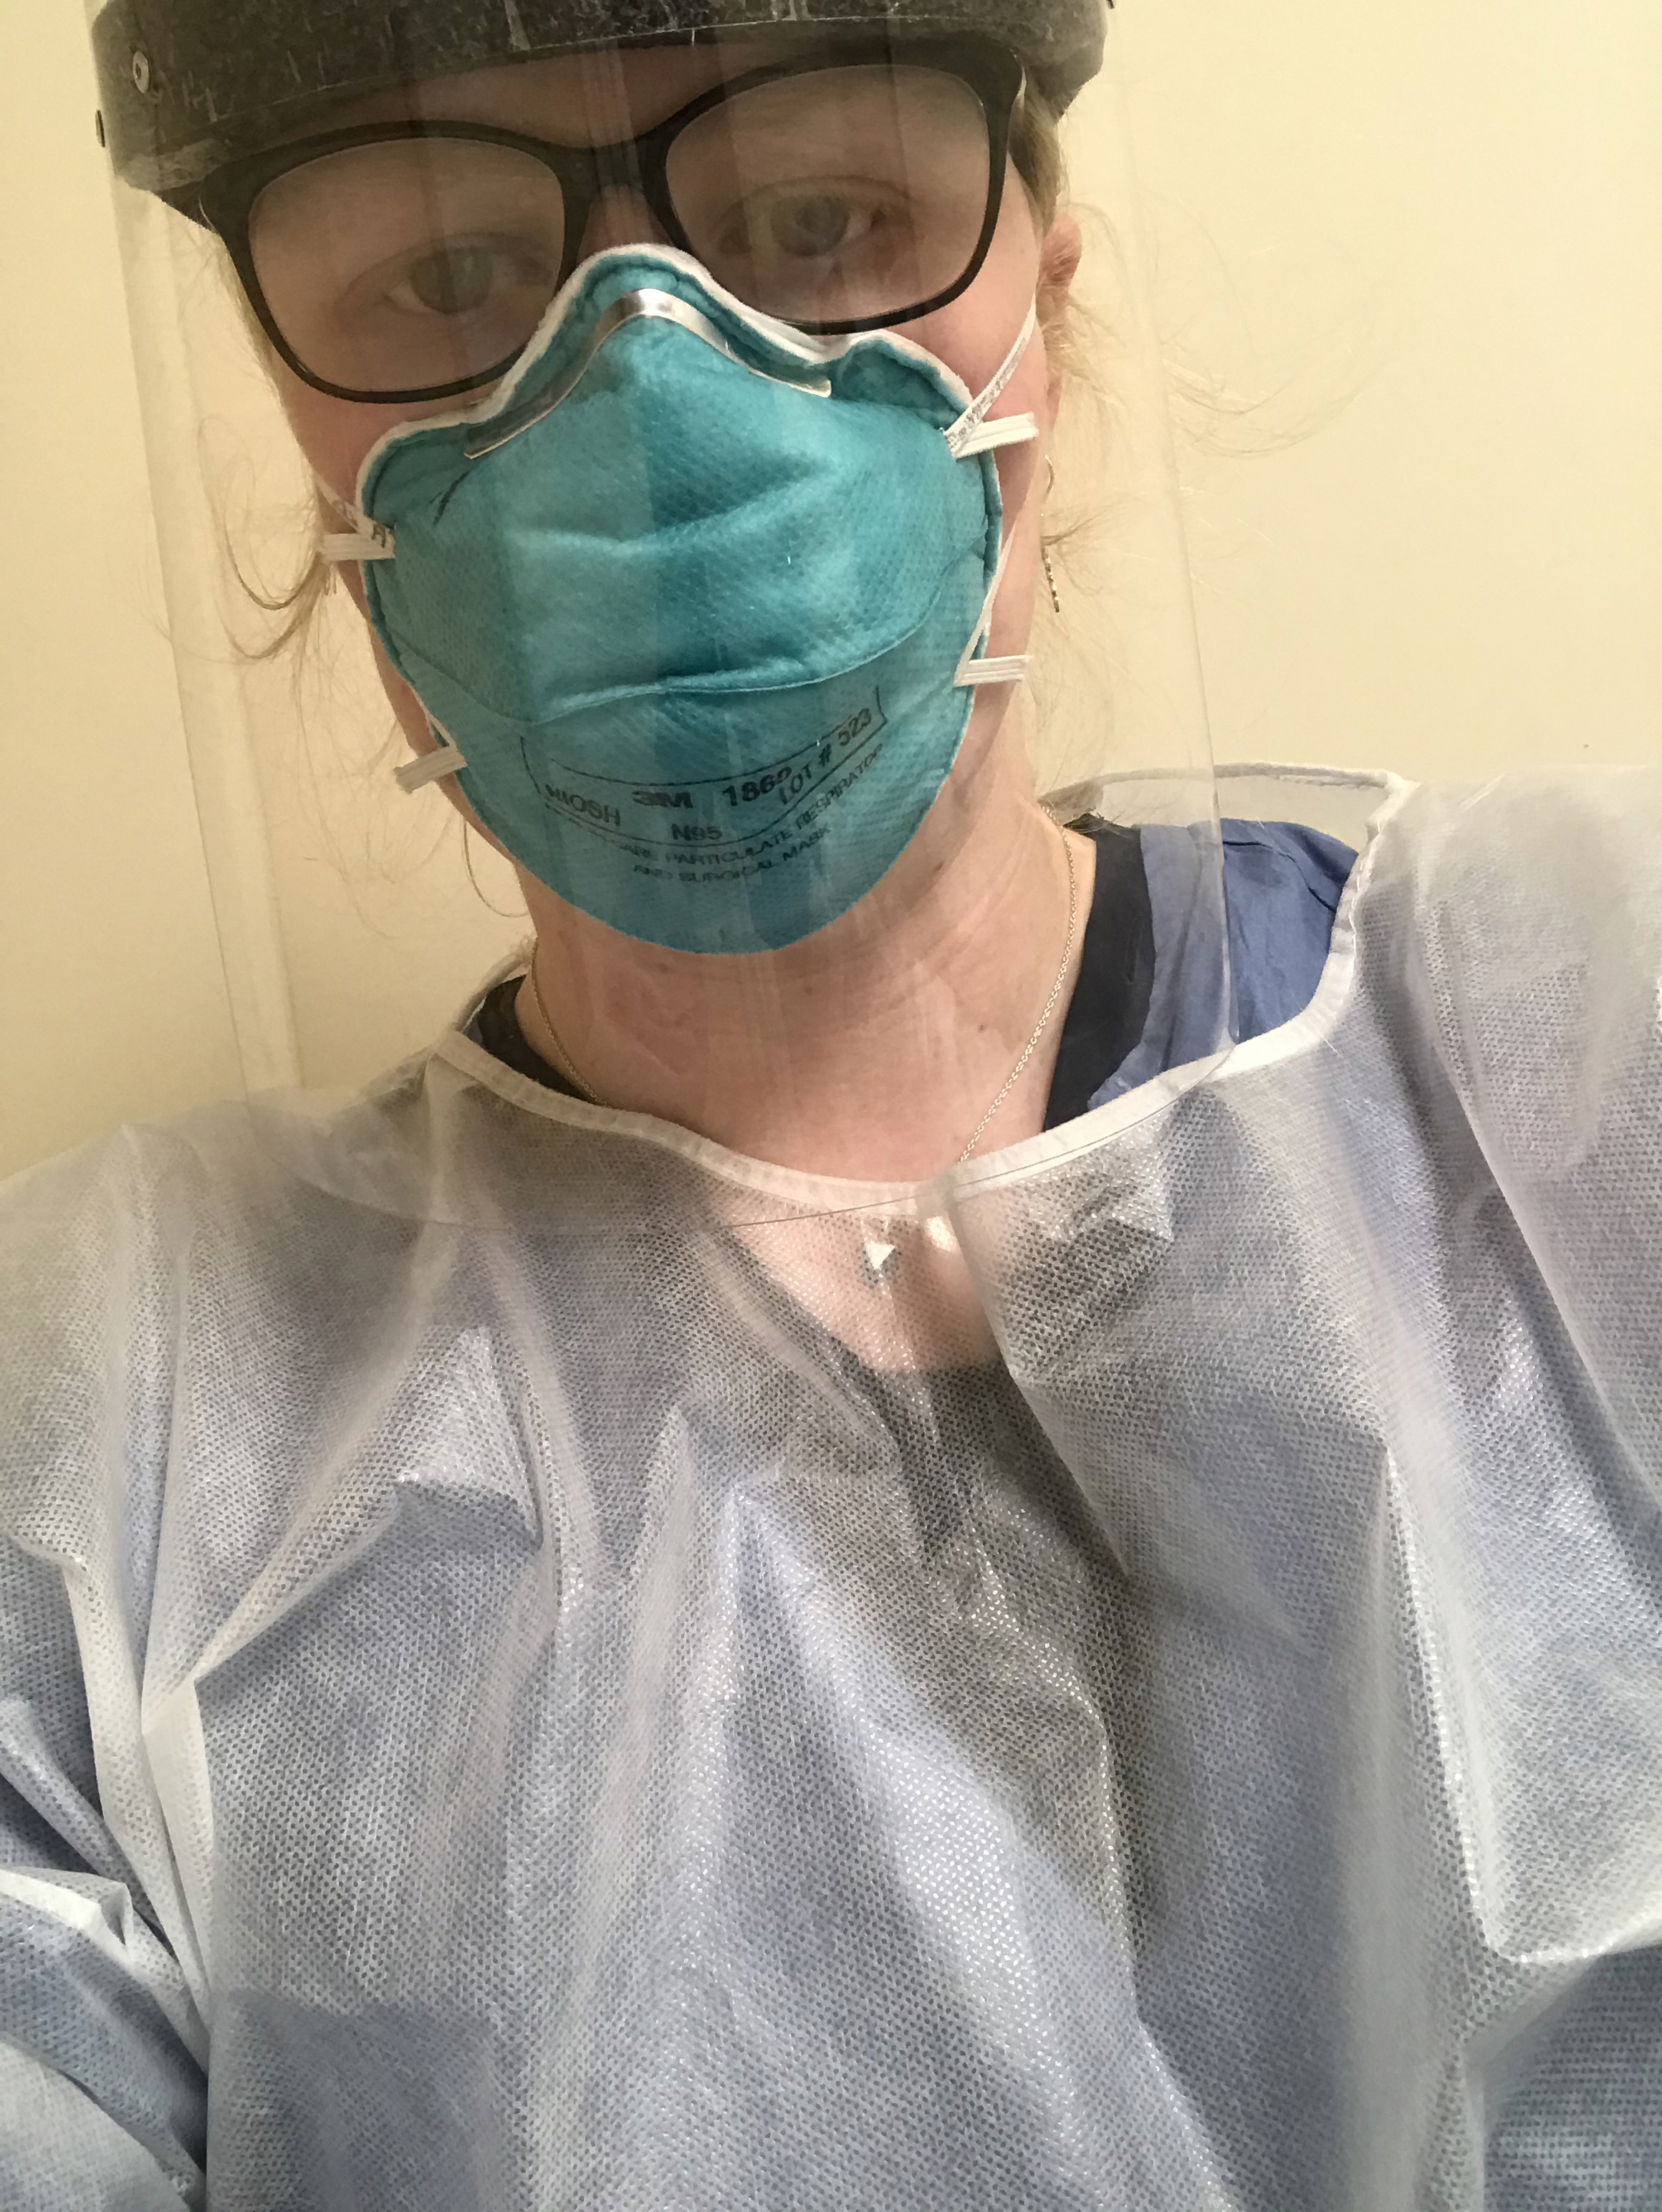 Rose Piscuskas '21 in hospital scrubs and PPE